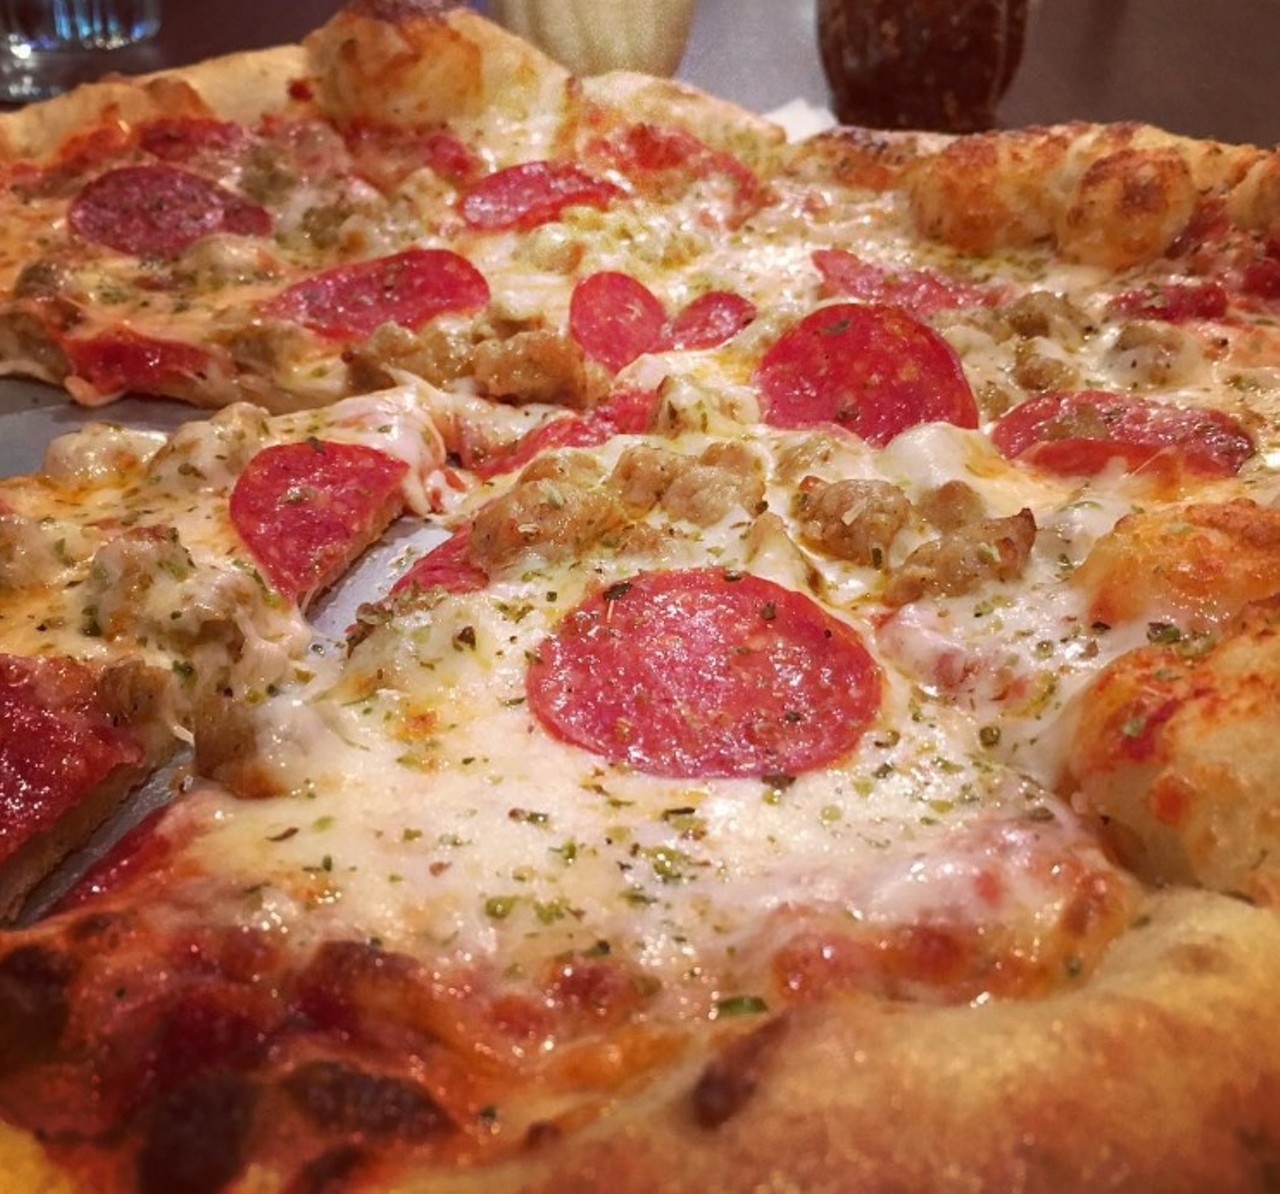 Corner Bistro
4993 Loughborough Ave.
St. Louis, MO 63109
(314) 353-1811
Corner Bistro's hand-tossed pizzas are made from scratch in a stone oven. The pizzas are 14 inches and come in varieties such as margherita, chicken and mushroom and Buffalo chicken. Photo courtesy of Instagram / cheathamjordanmichael.